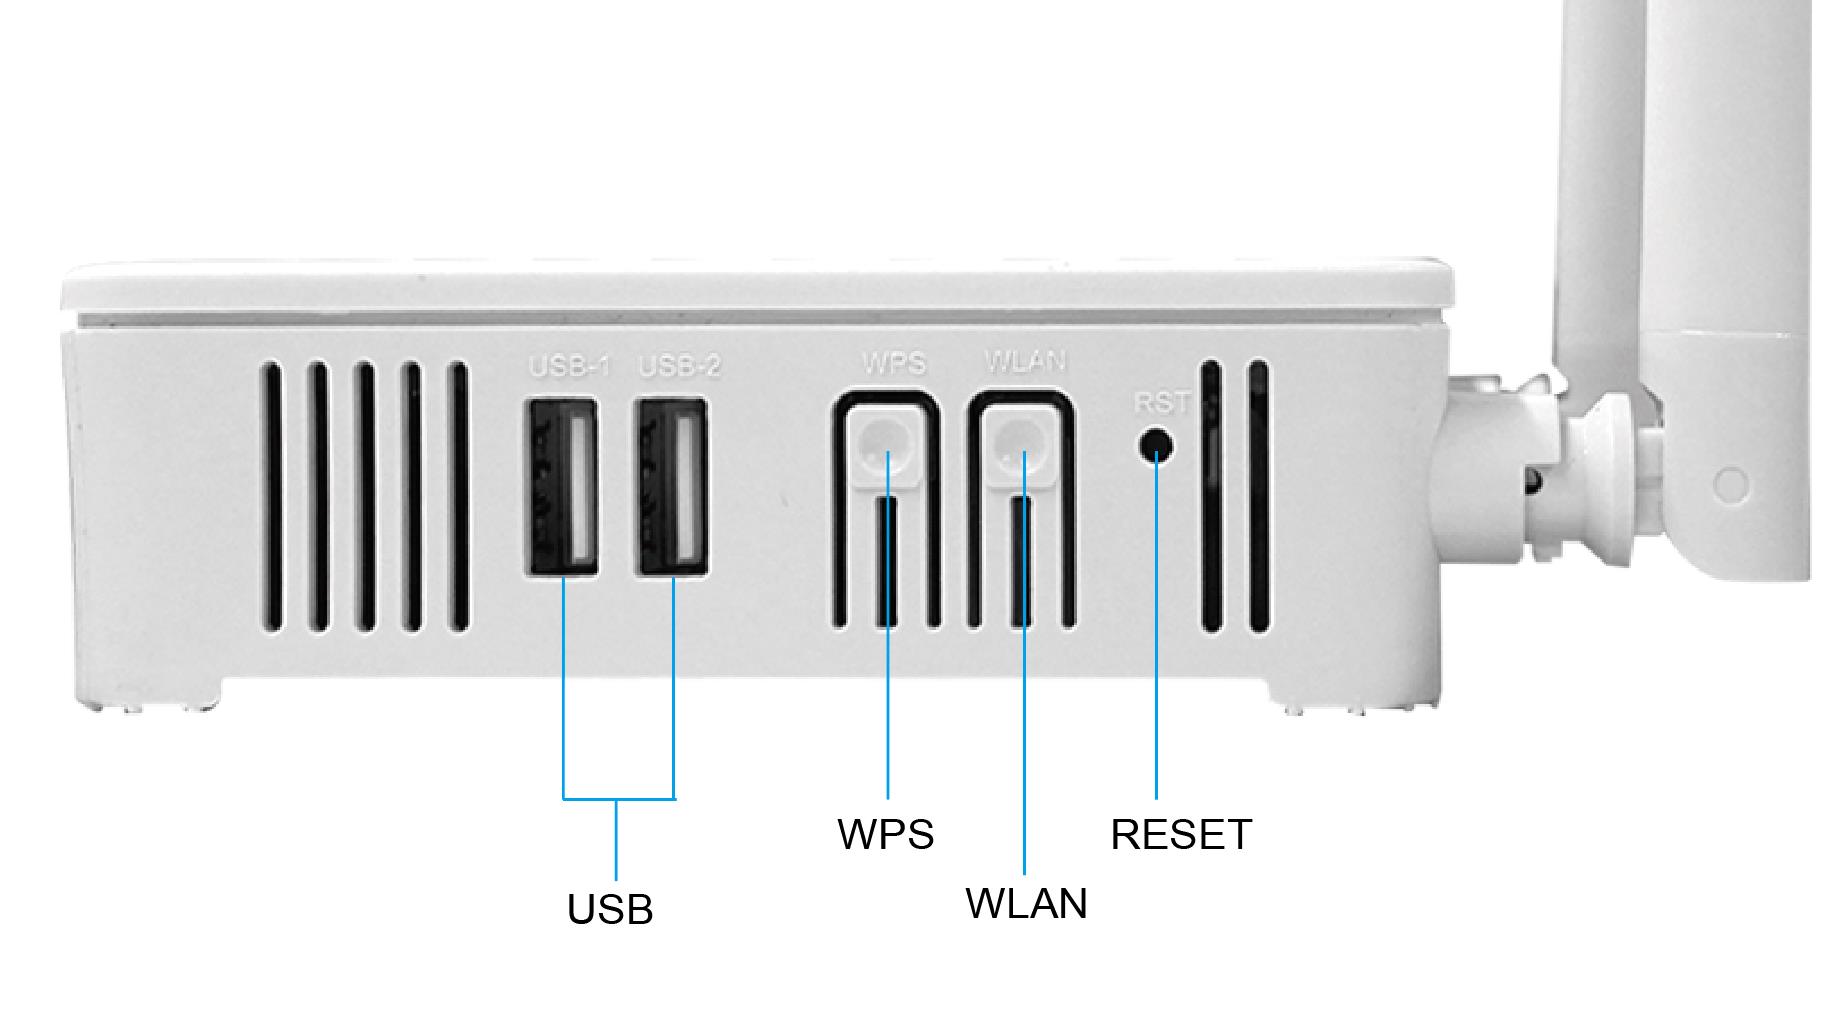 AC1200 wireless VoIP GPon router